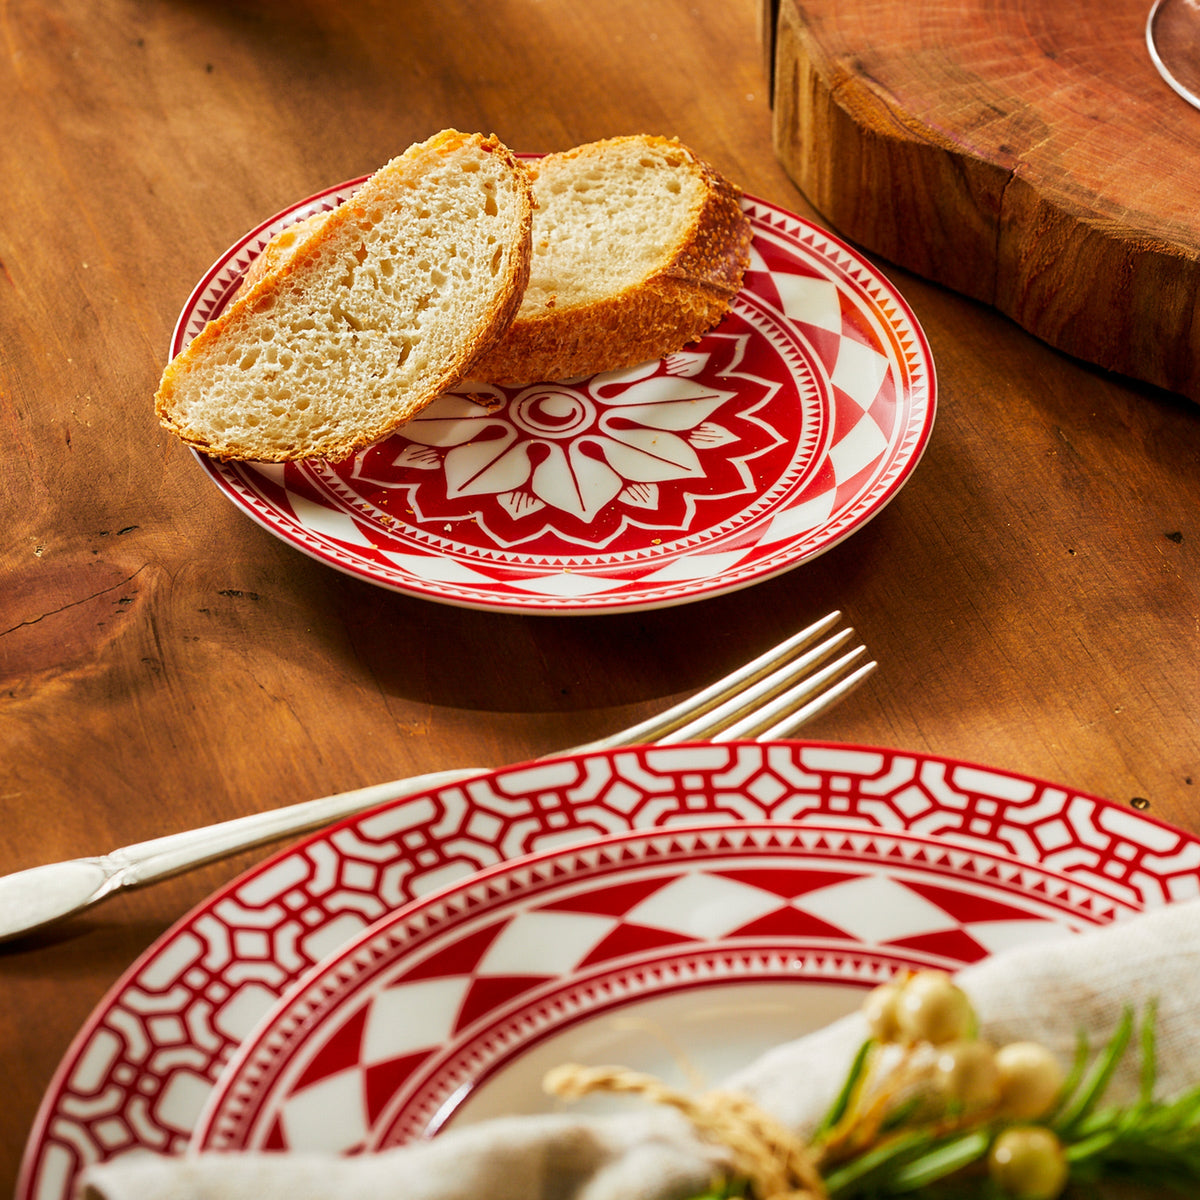 Two slices of bread rest on a Fez Crimson Small Plate from Caskata Artisanal Home, part of an heirloom-quality dinnerware set. A matching larger plate and a fork are placed nearby on the wooden table, creating an entertaining powerhouse for any meal.